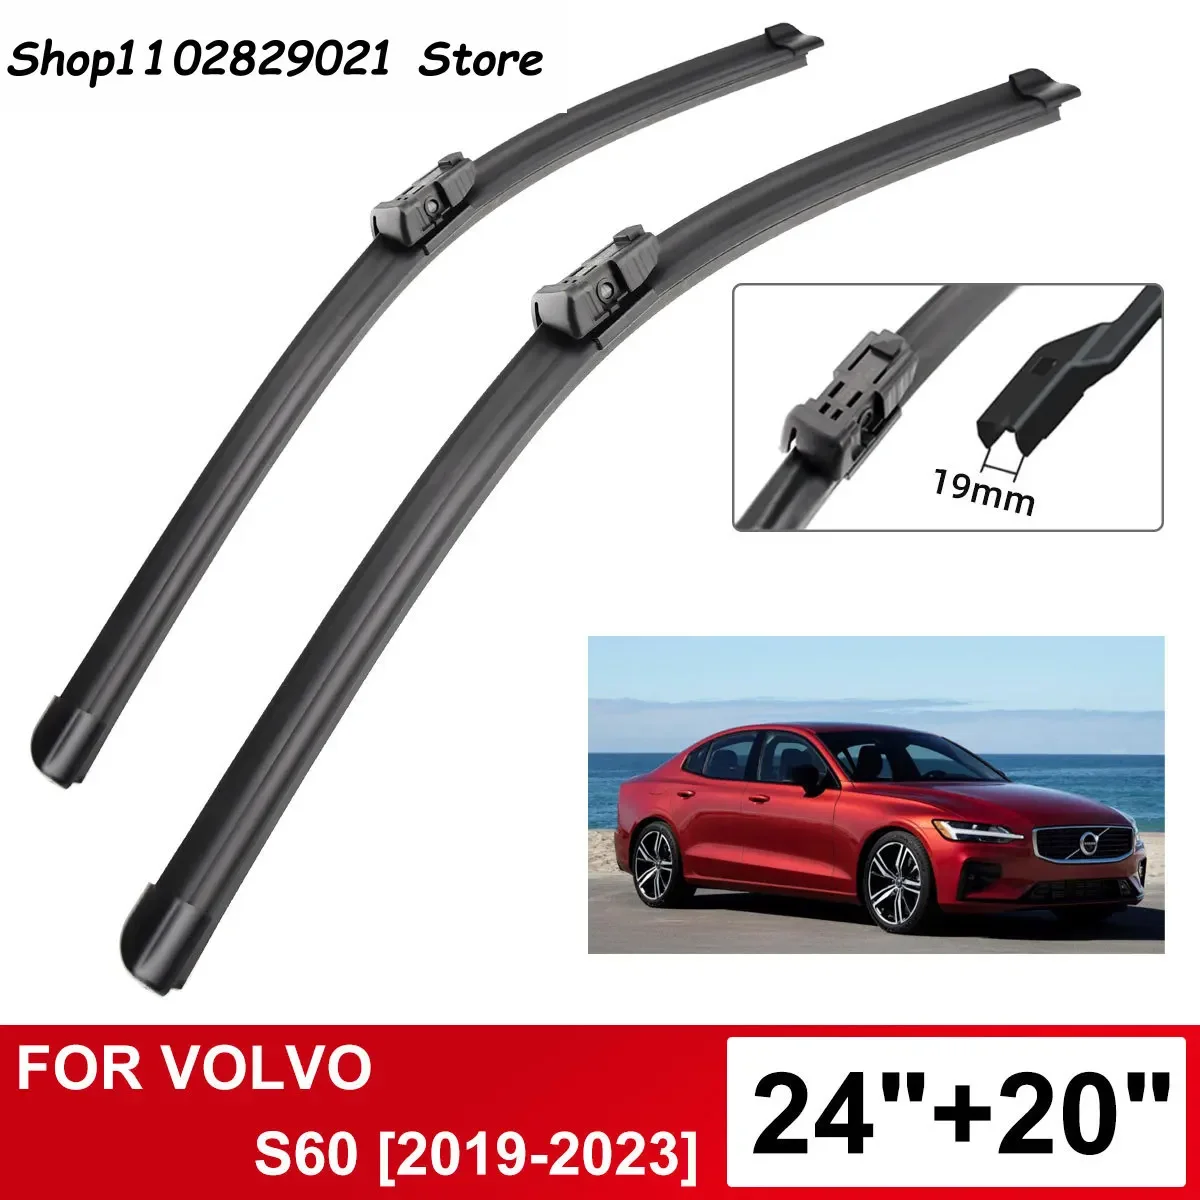 

For Volvo S60 2019-2023 Car Accessories Front Windscreen Wiper Blade Brushes Wipers 2019 2020 2022 2023